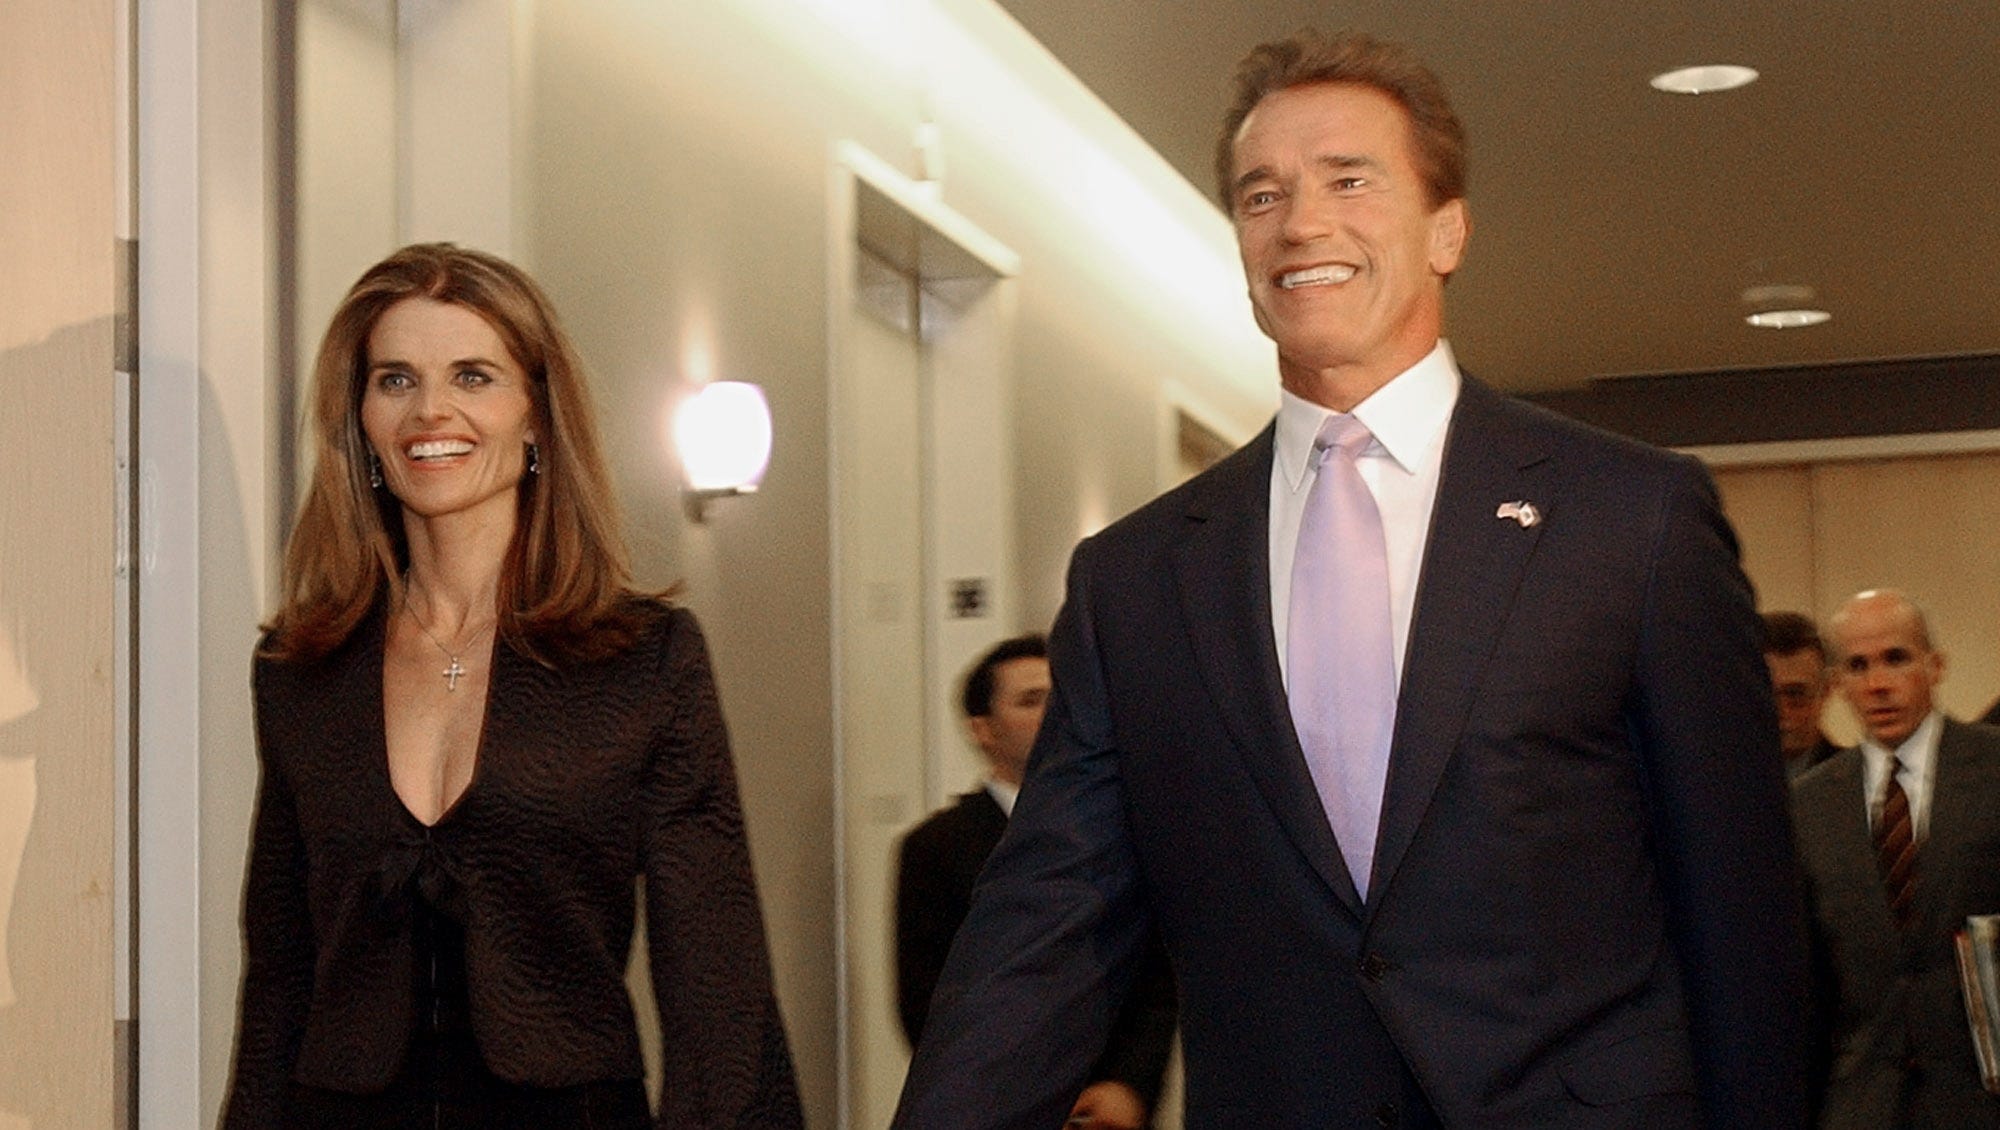 Schwarzenegger Opens Up Admits Affairs In New Book